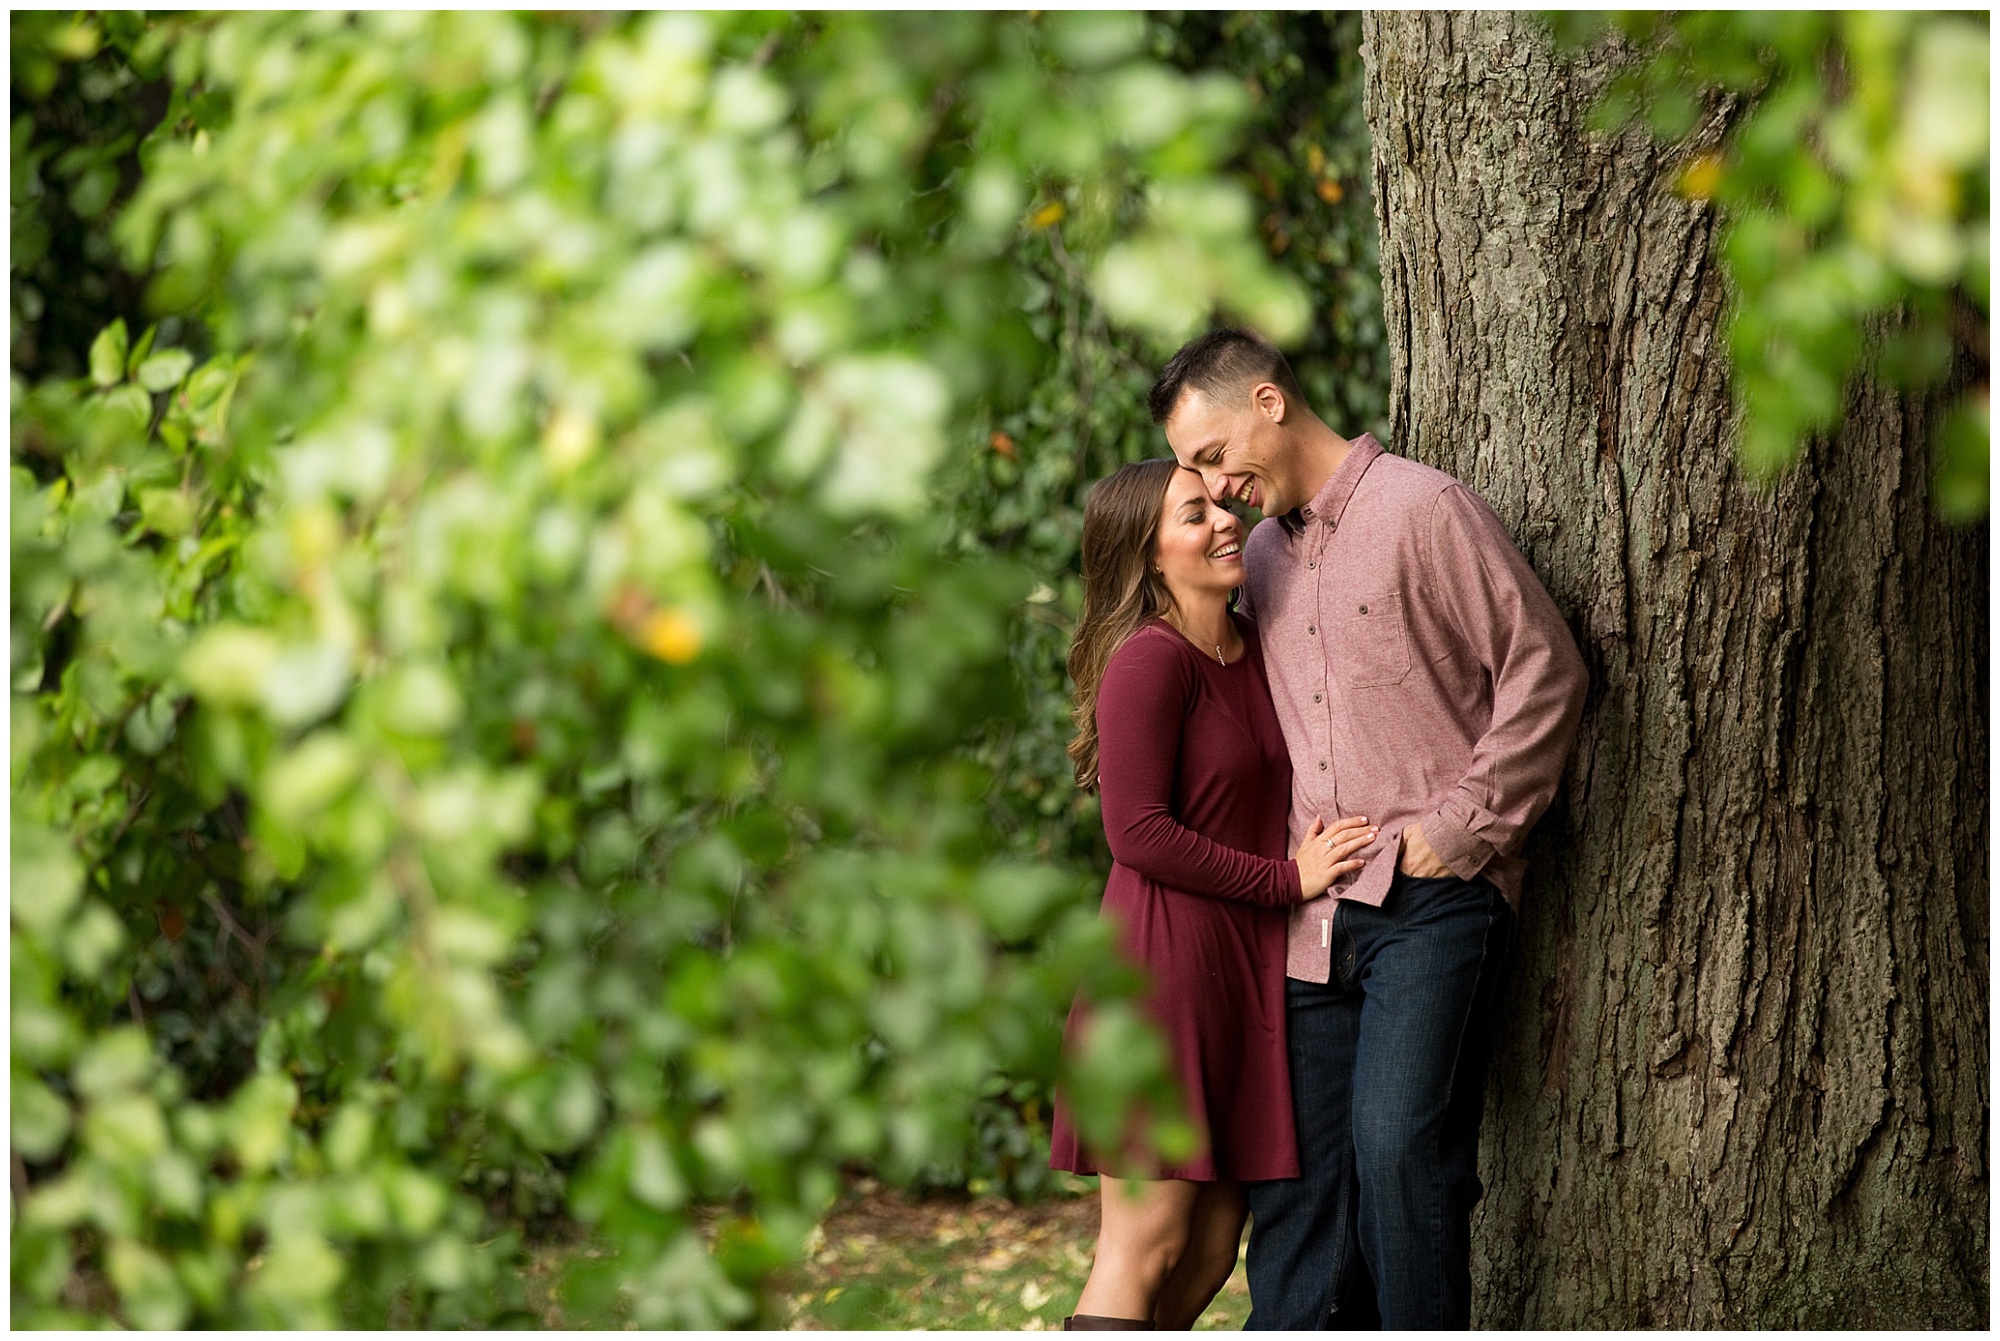 Photo of an engaged couple laughing togehter while under a tree.